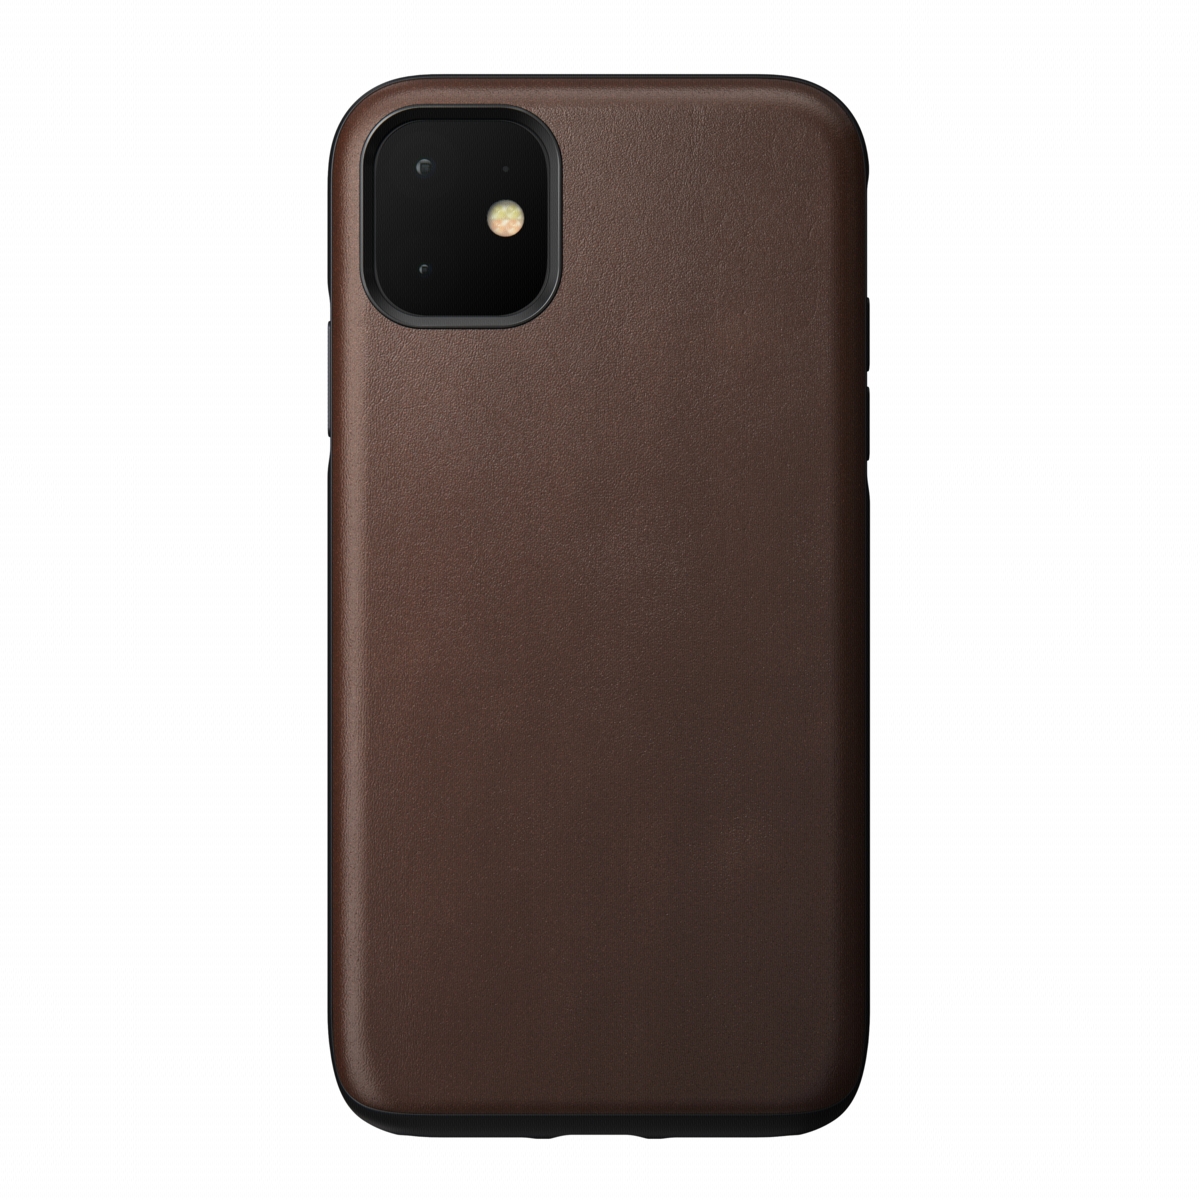 Nomad Case Leather Rugged Rustic Brown iPhone 11 Pro